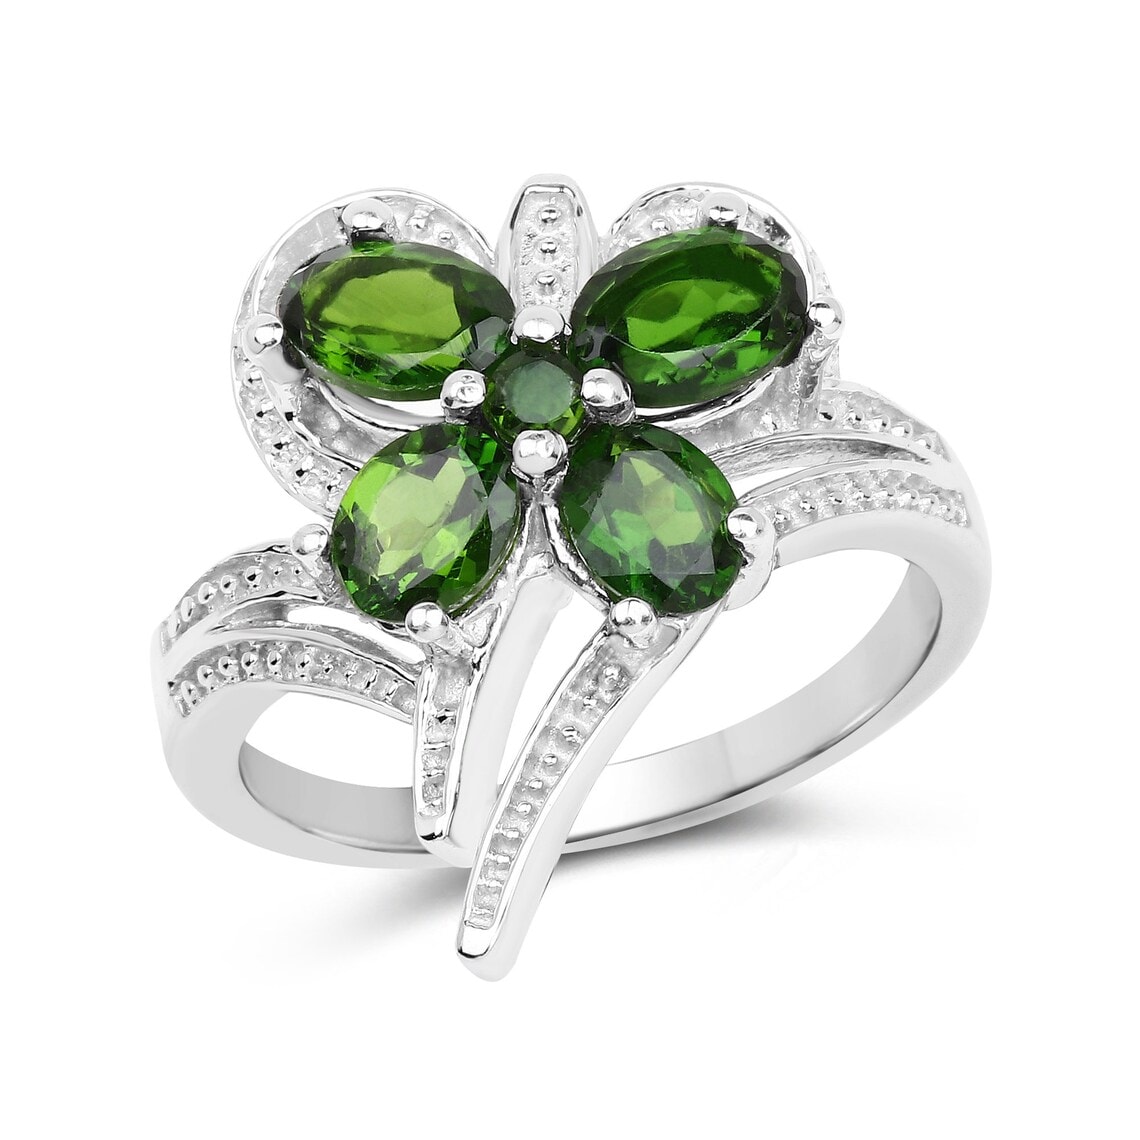 1.64 ctw natural chrome diopside ring